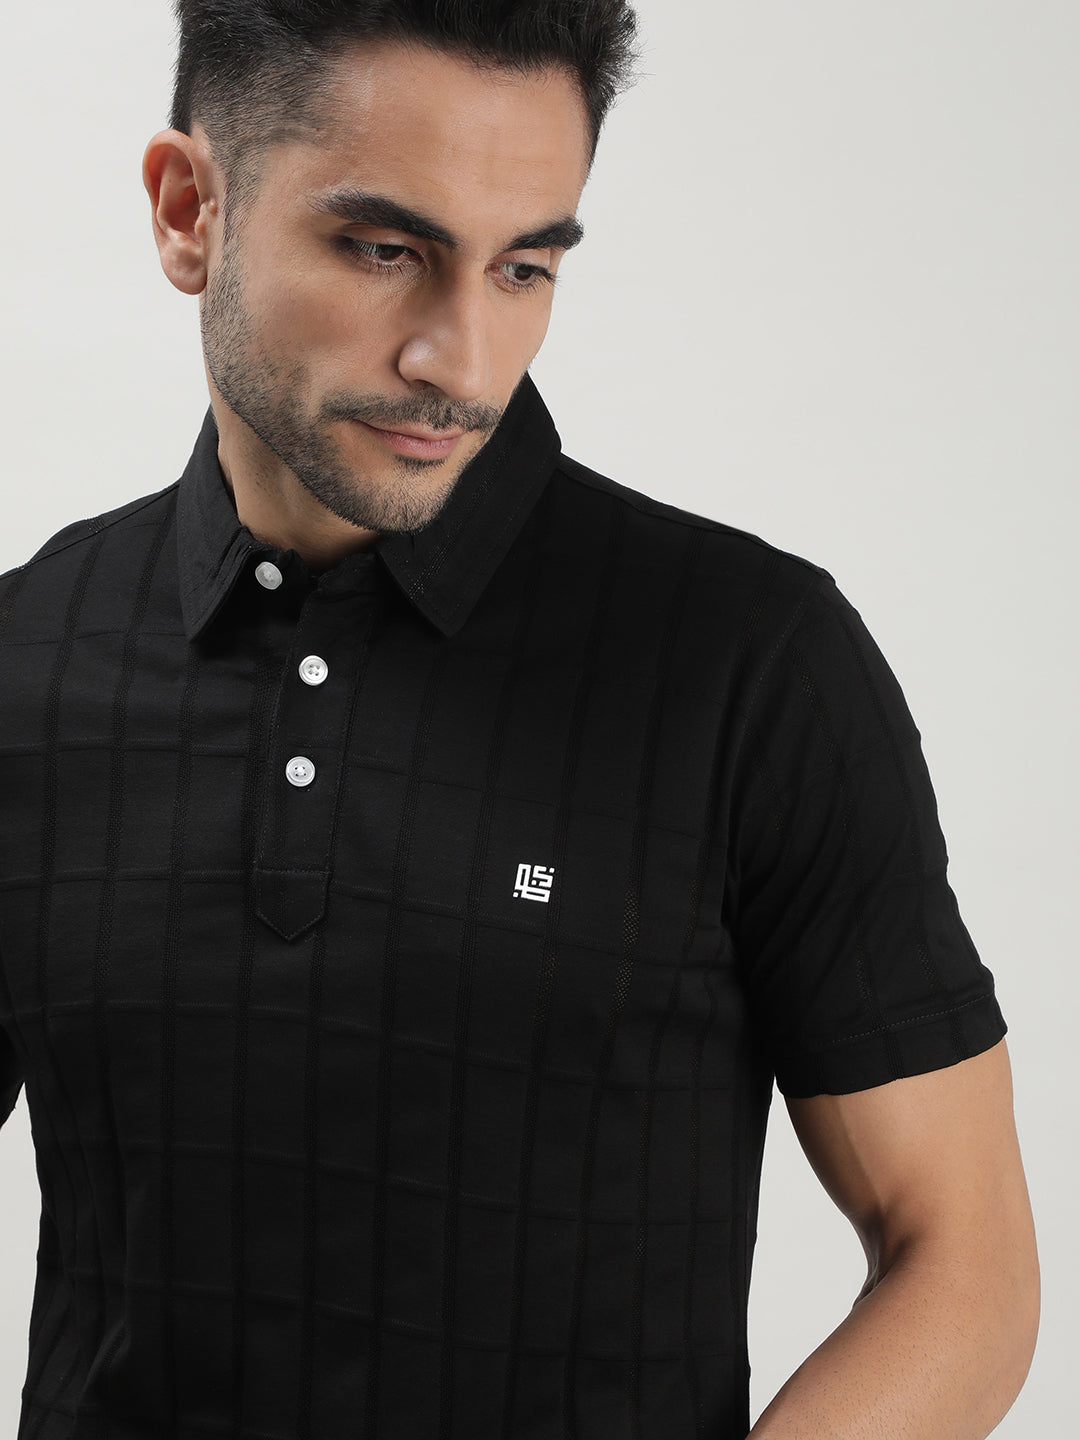 Black Polo T-shirt for Men at Loom & Spin